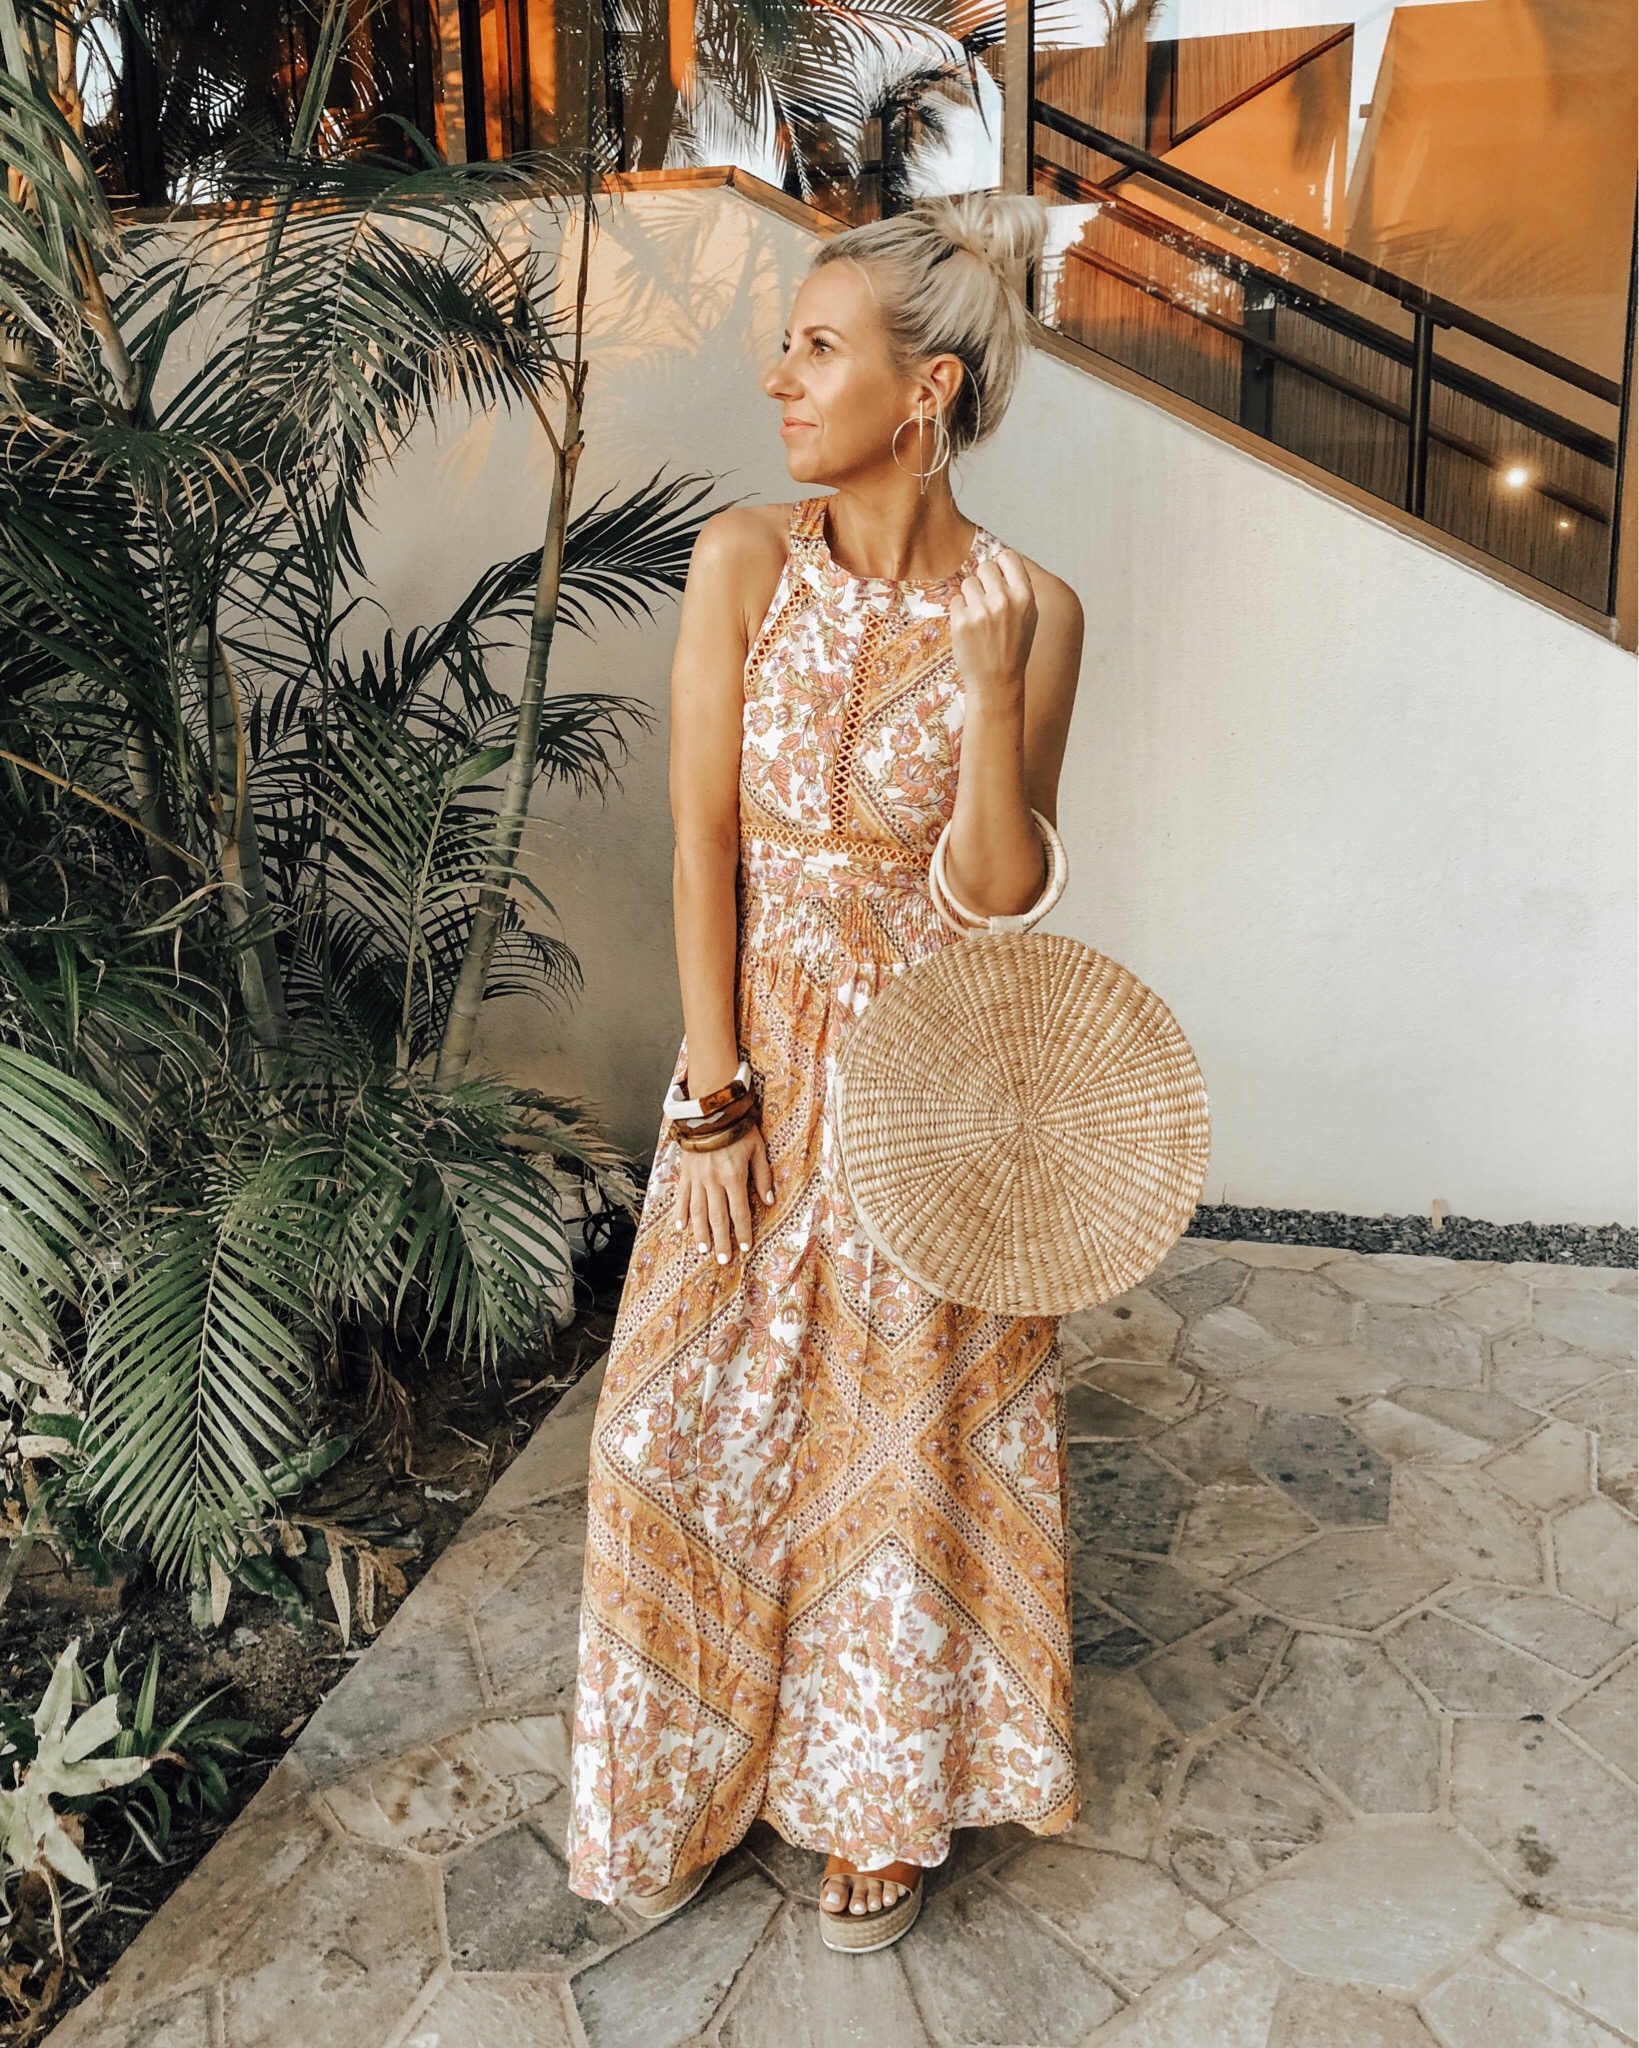 SPRING BREAK VACATION STYLE- Jaclyn De Leon Style = Are you heading somehwere warm for Spring Break and need to update your style? I've got you covered with all the looks you need for the beach or pool including boho style tunics, kimonos, swim cover ups and maxi dresses.